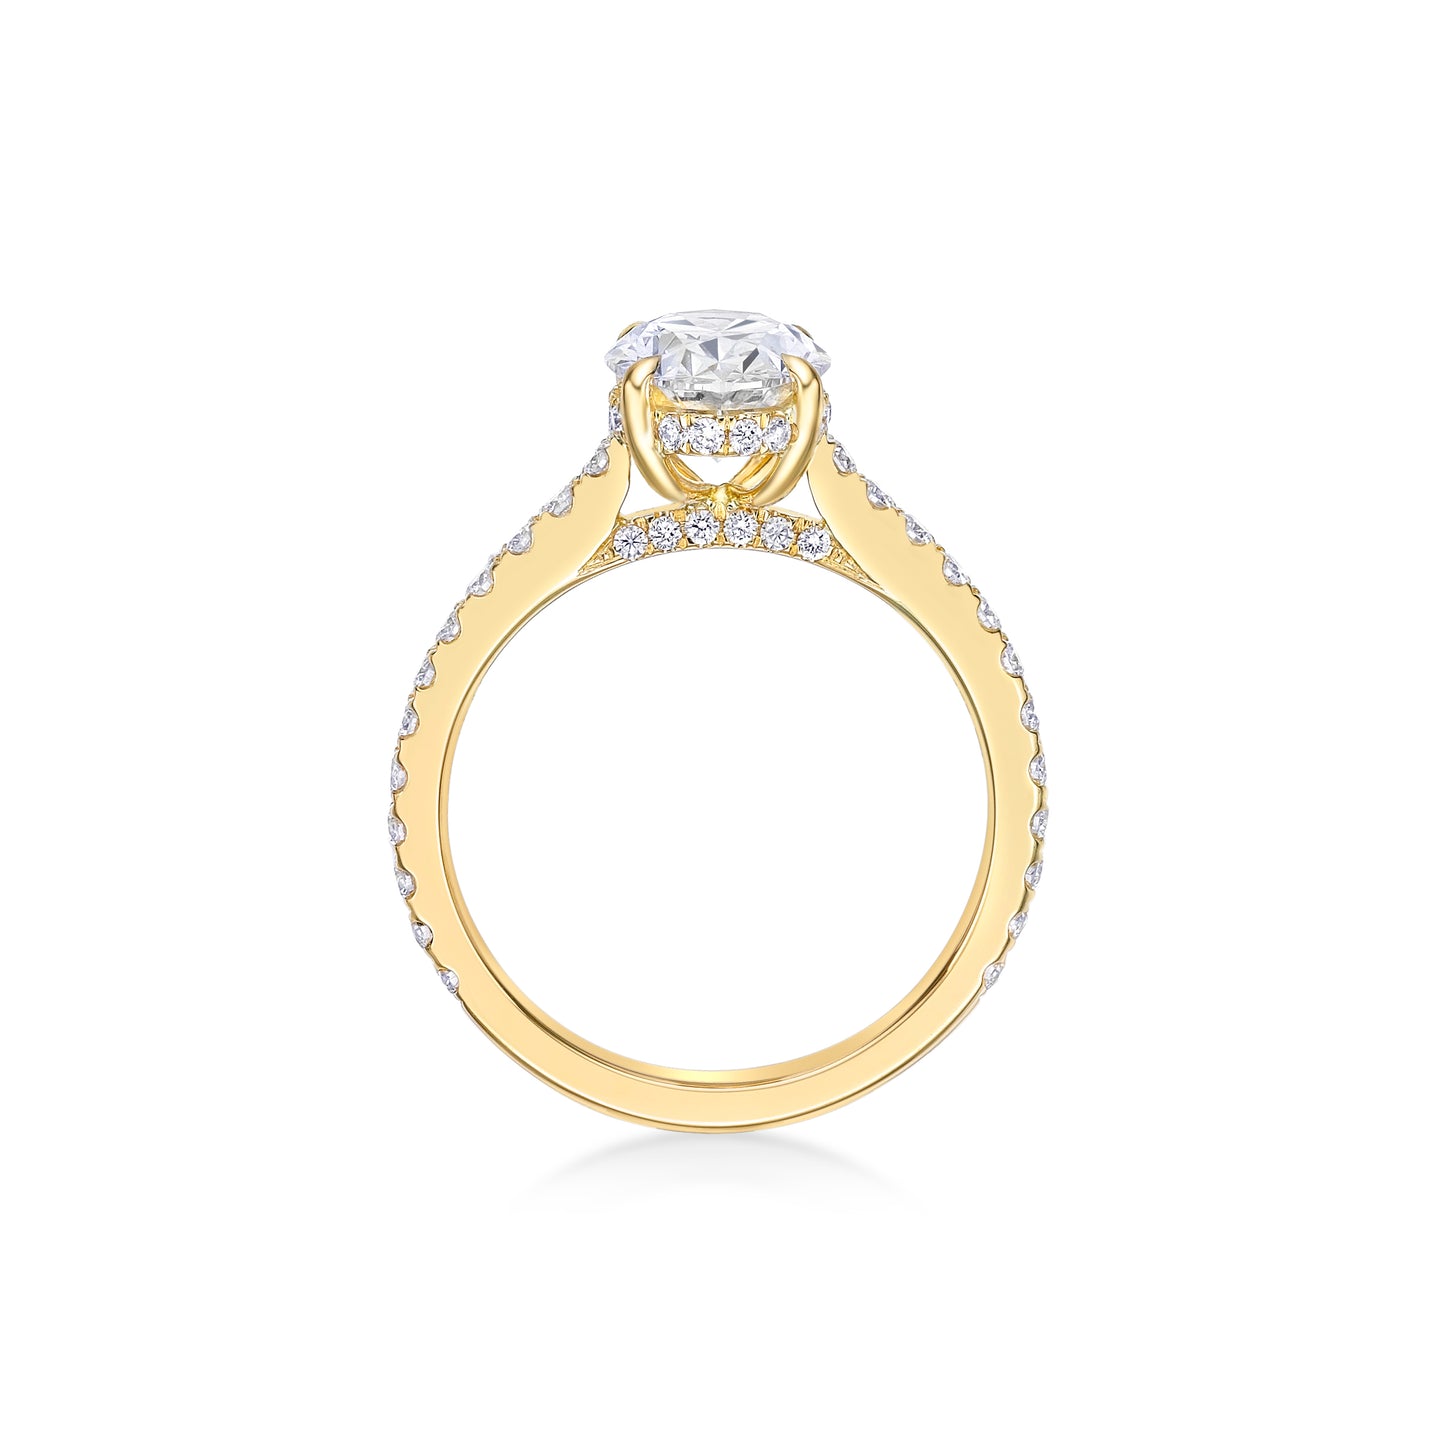 1.85ct Oval Brilliant diamond in a handmade 18K Yellow Gold engagement ring setting with Hidden Halo and diamond eternity band